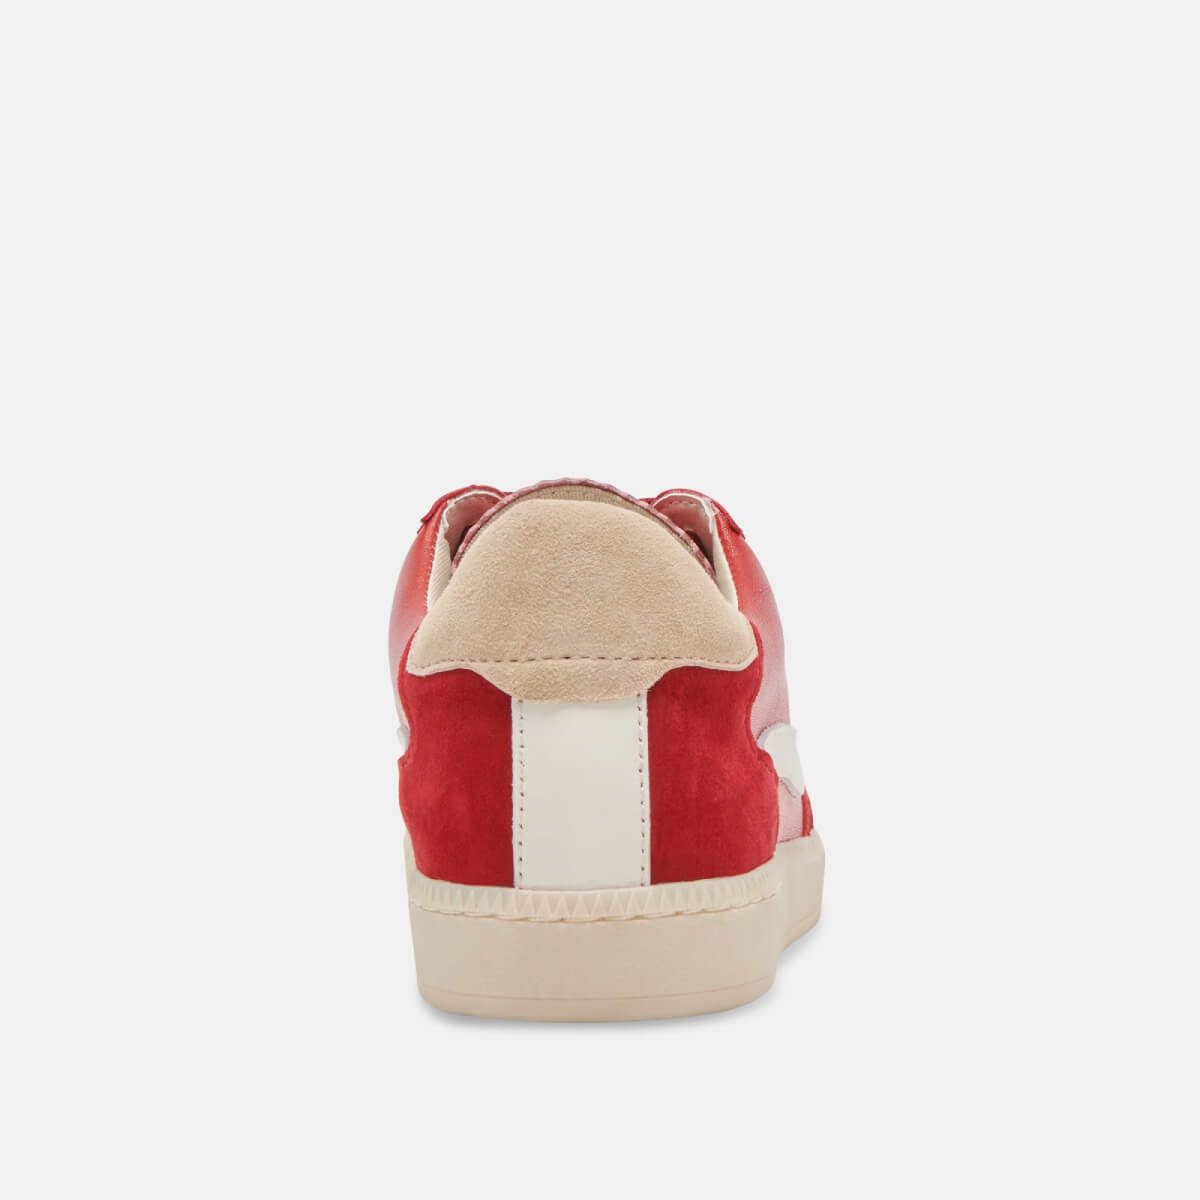 Dolce Vita Notice Sneakers red back | MILK MONEY milkmoney.co | cute shoes for women. ladies shoes. nice shoes for women. footwear for women. ladies shoes online. ladies footwear. womens shoes and boots. pretty shoes for women. beautiful shoes for women.